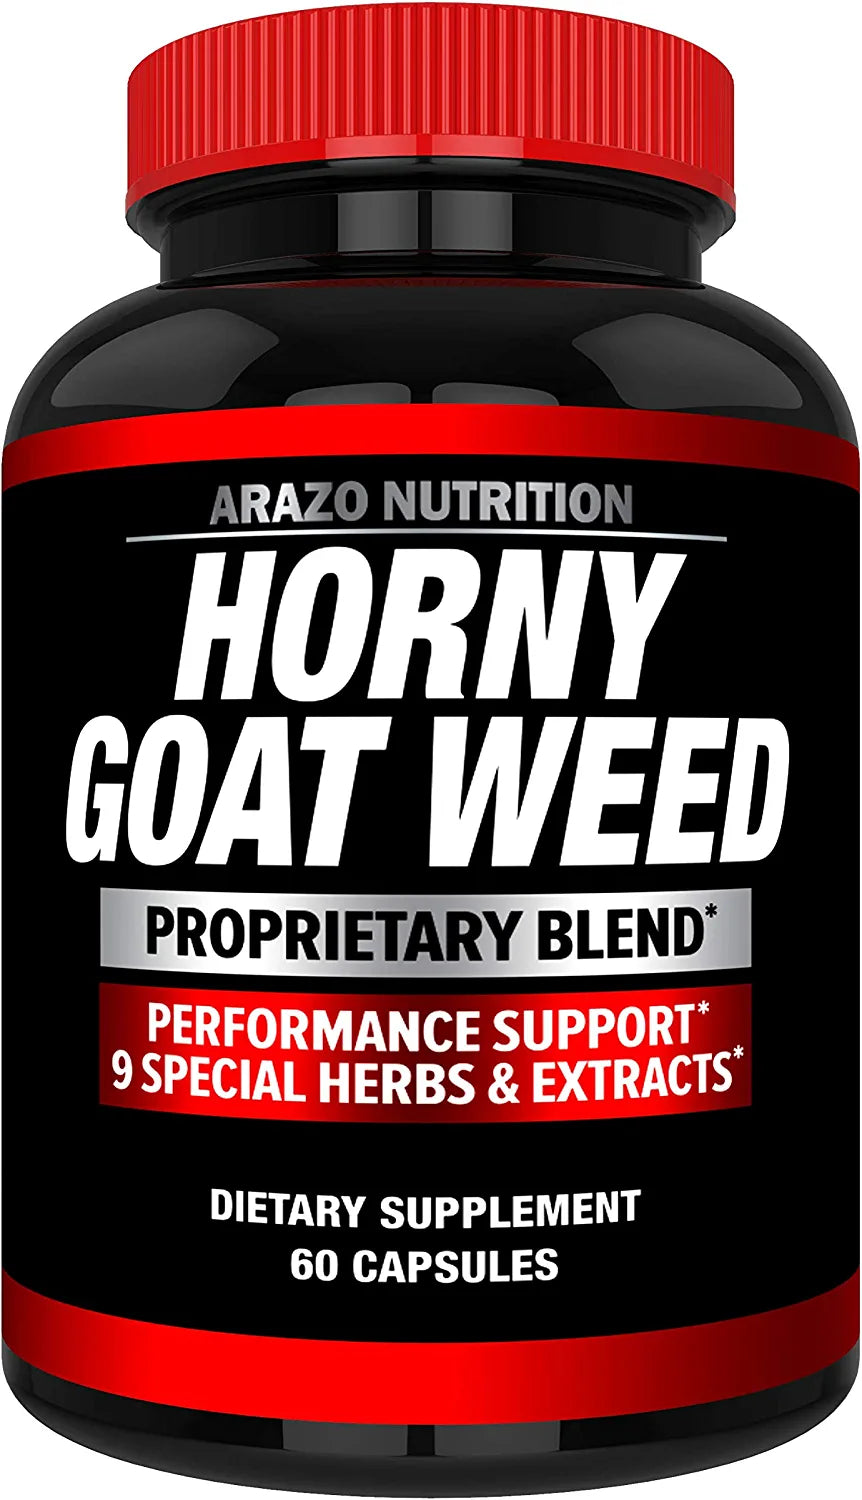 Arazo Nutrition Premium Horny Goat Weed Extract 60 Capsules with Maca Root, Ginseng, Muira Puama and L-Arginine - for Men and Women – 100% Pure Herbal Nutritional Supplement